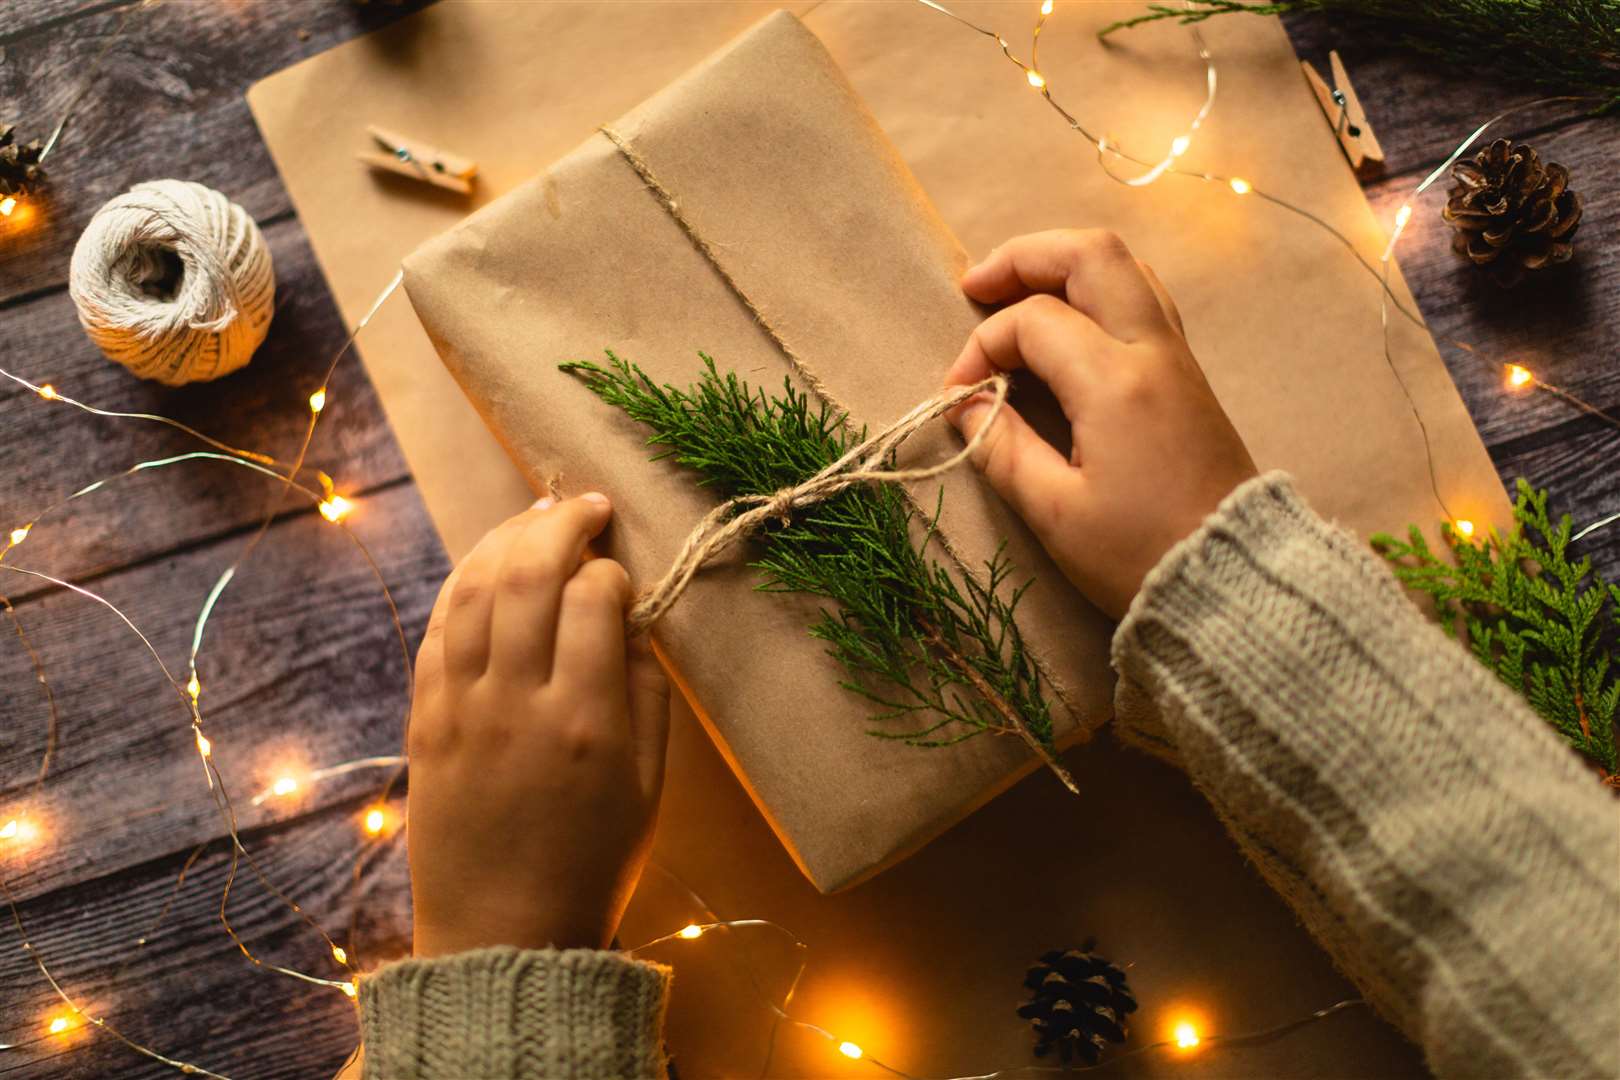 Choose wrapping paper that can be recycled.